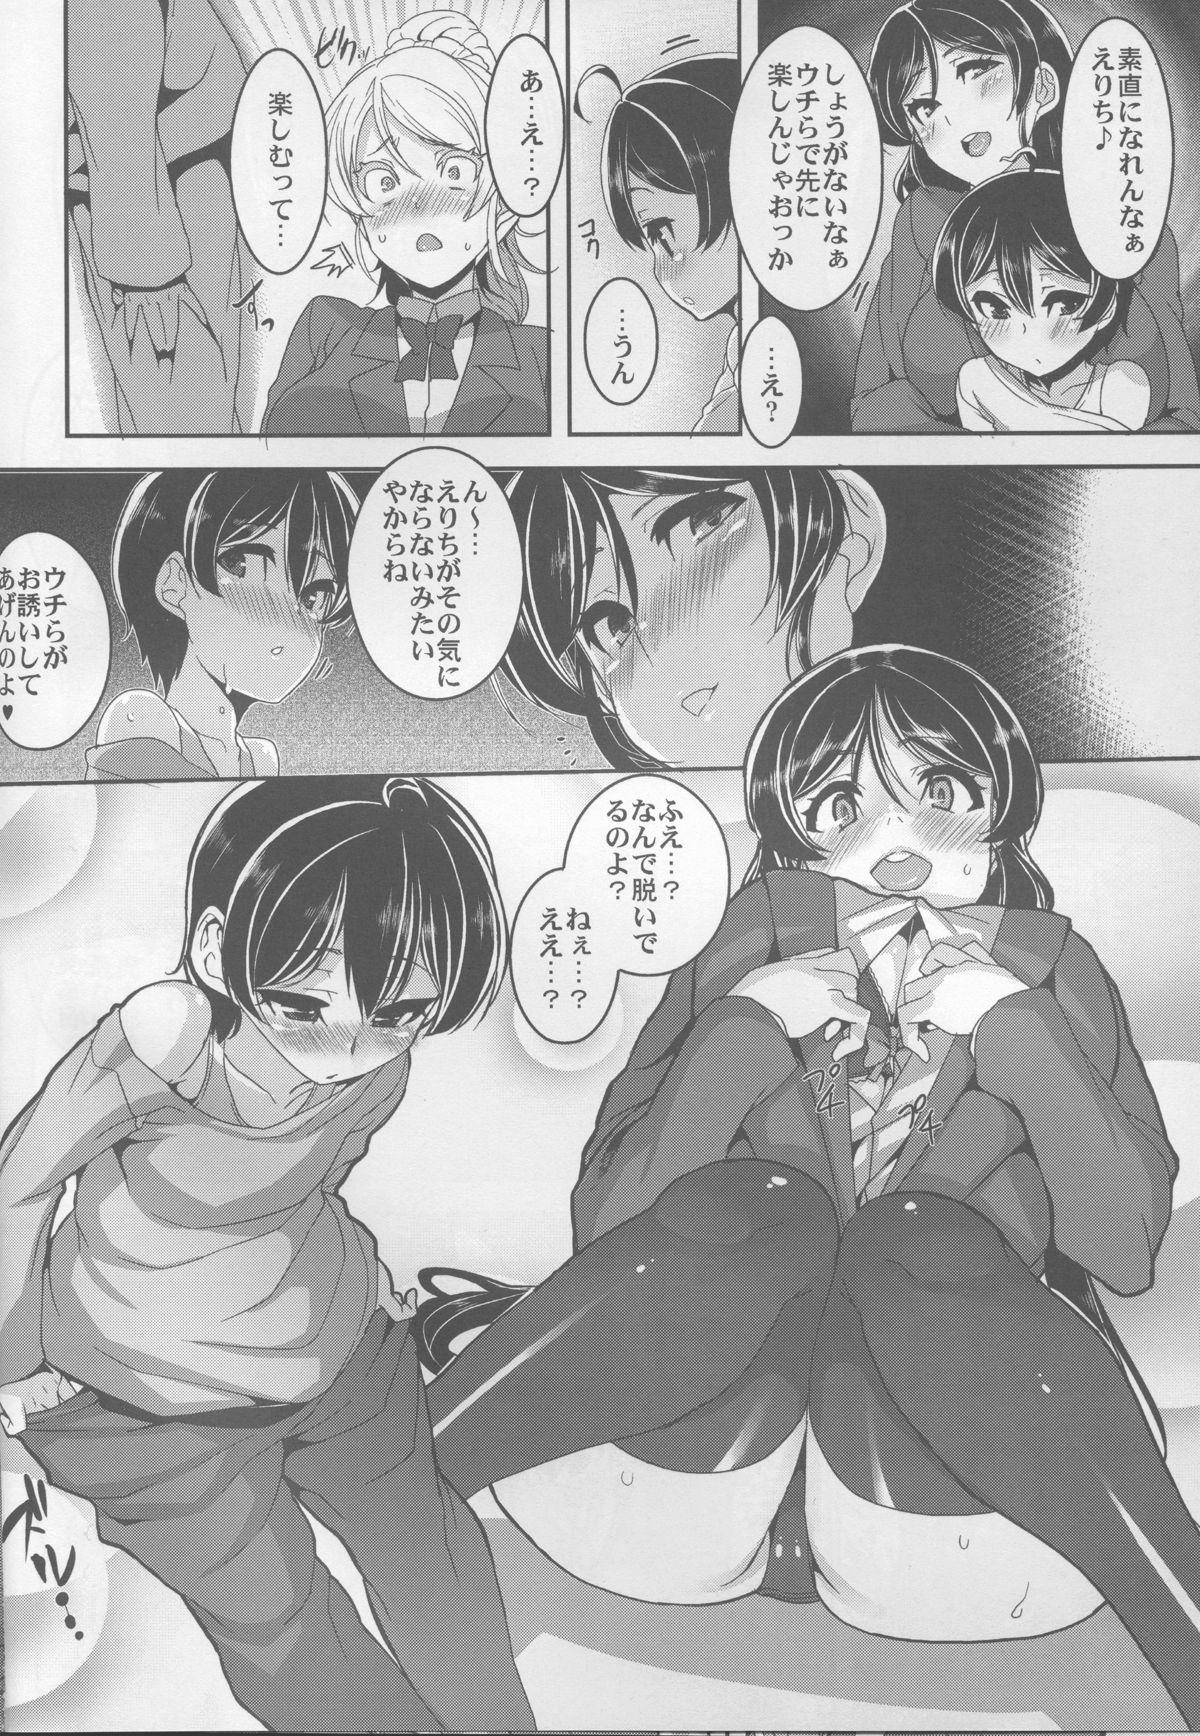 Pervert Oneechan to Issho - Love live Free 18 Year Old Porn - Page 7